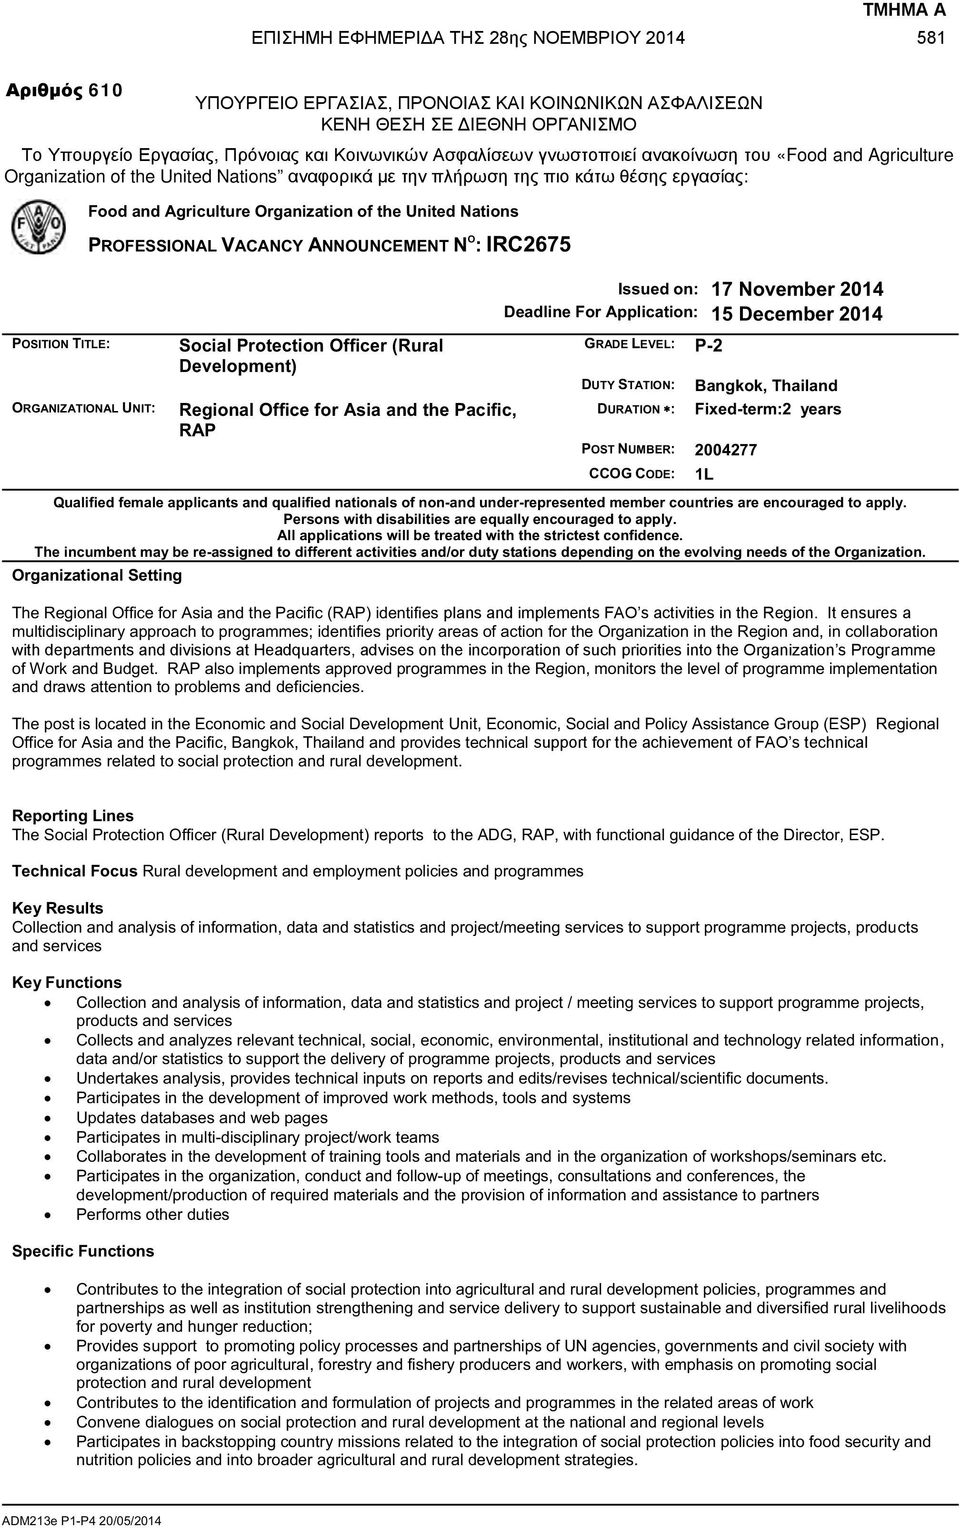 PROFESSIONAL VACANCY ANNOUNCEMENT N O : IRC2675 Social Protection Officer (Rural Development) Regional Office for Asia and the Pacific, RAP Issued on: 17 November 2014 Deadline For Application: 15